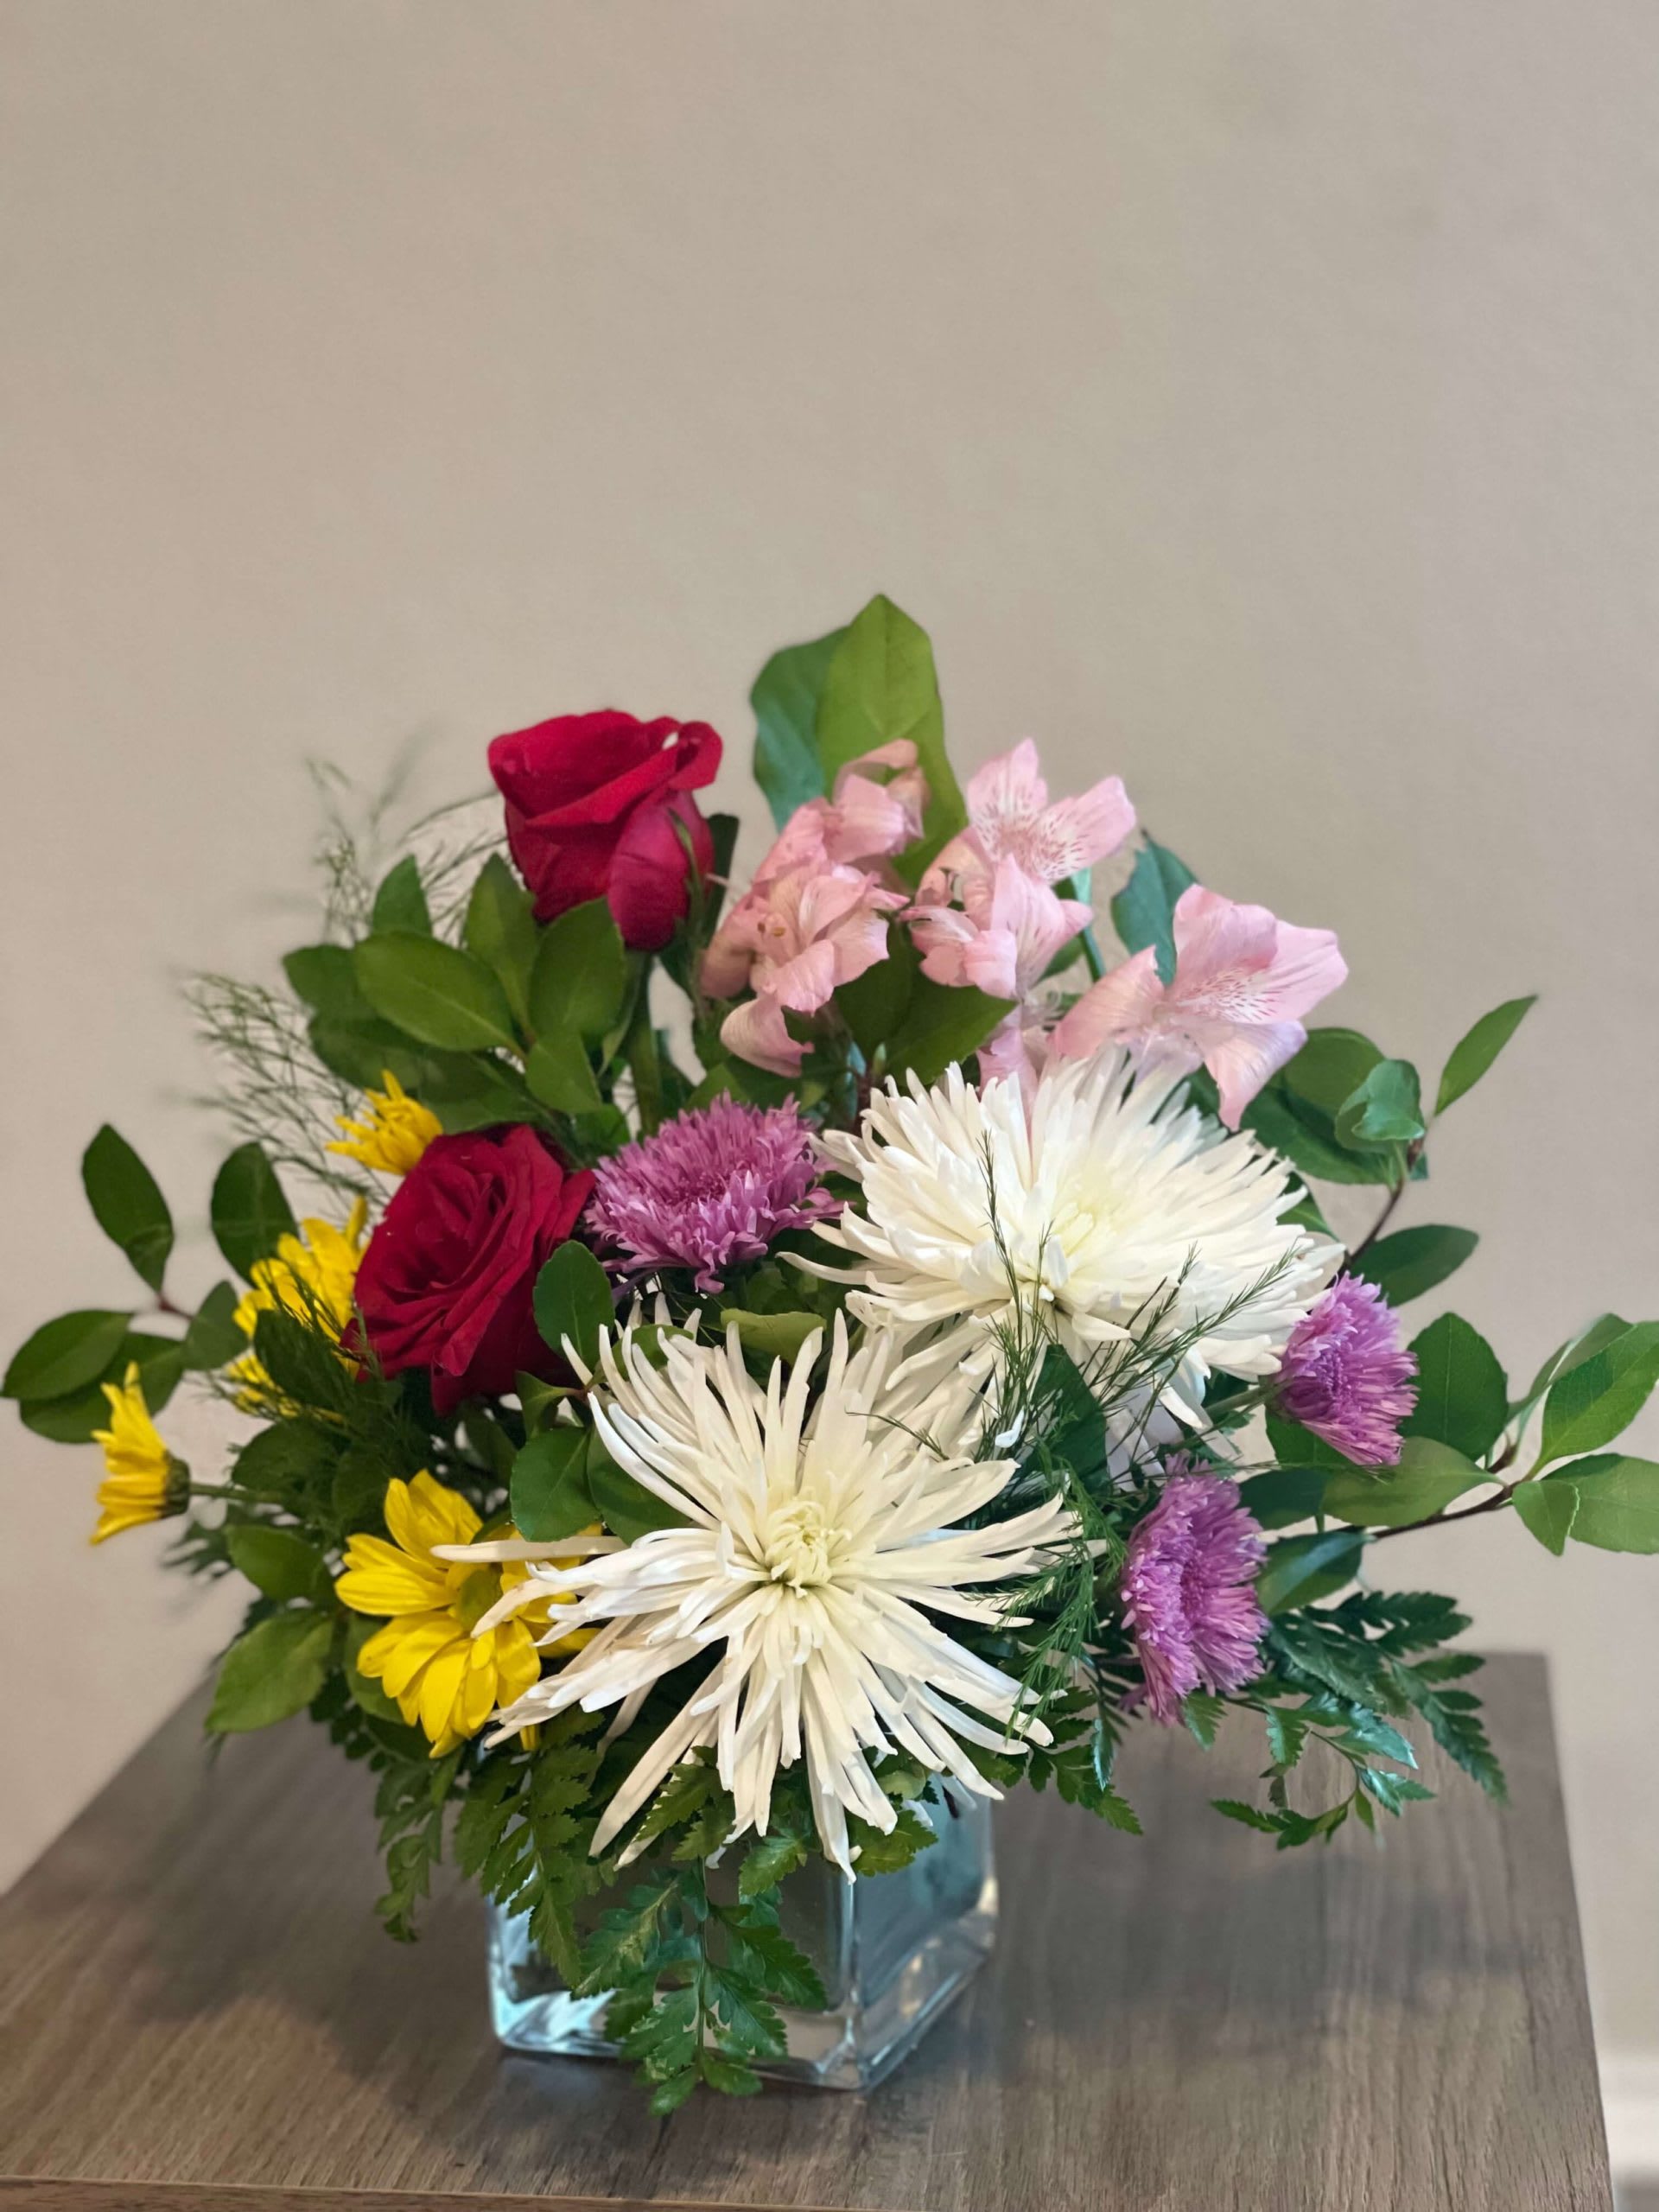 Happiness - This meticulously crafted bouquet is a thoughtful gift for any occasion, conveying appreciation, admiration, and love. The mix of red roses, pink alstroemeria, pink and yellow margarita, and white Anastasia flowers portray absolute joy. The flowers are carefully arranged and displayed inside a squared vase.